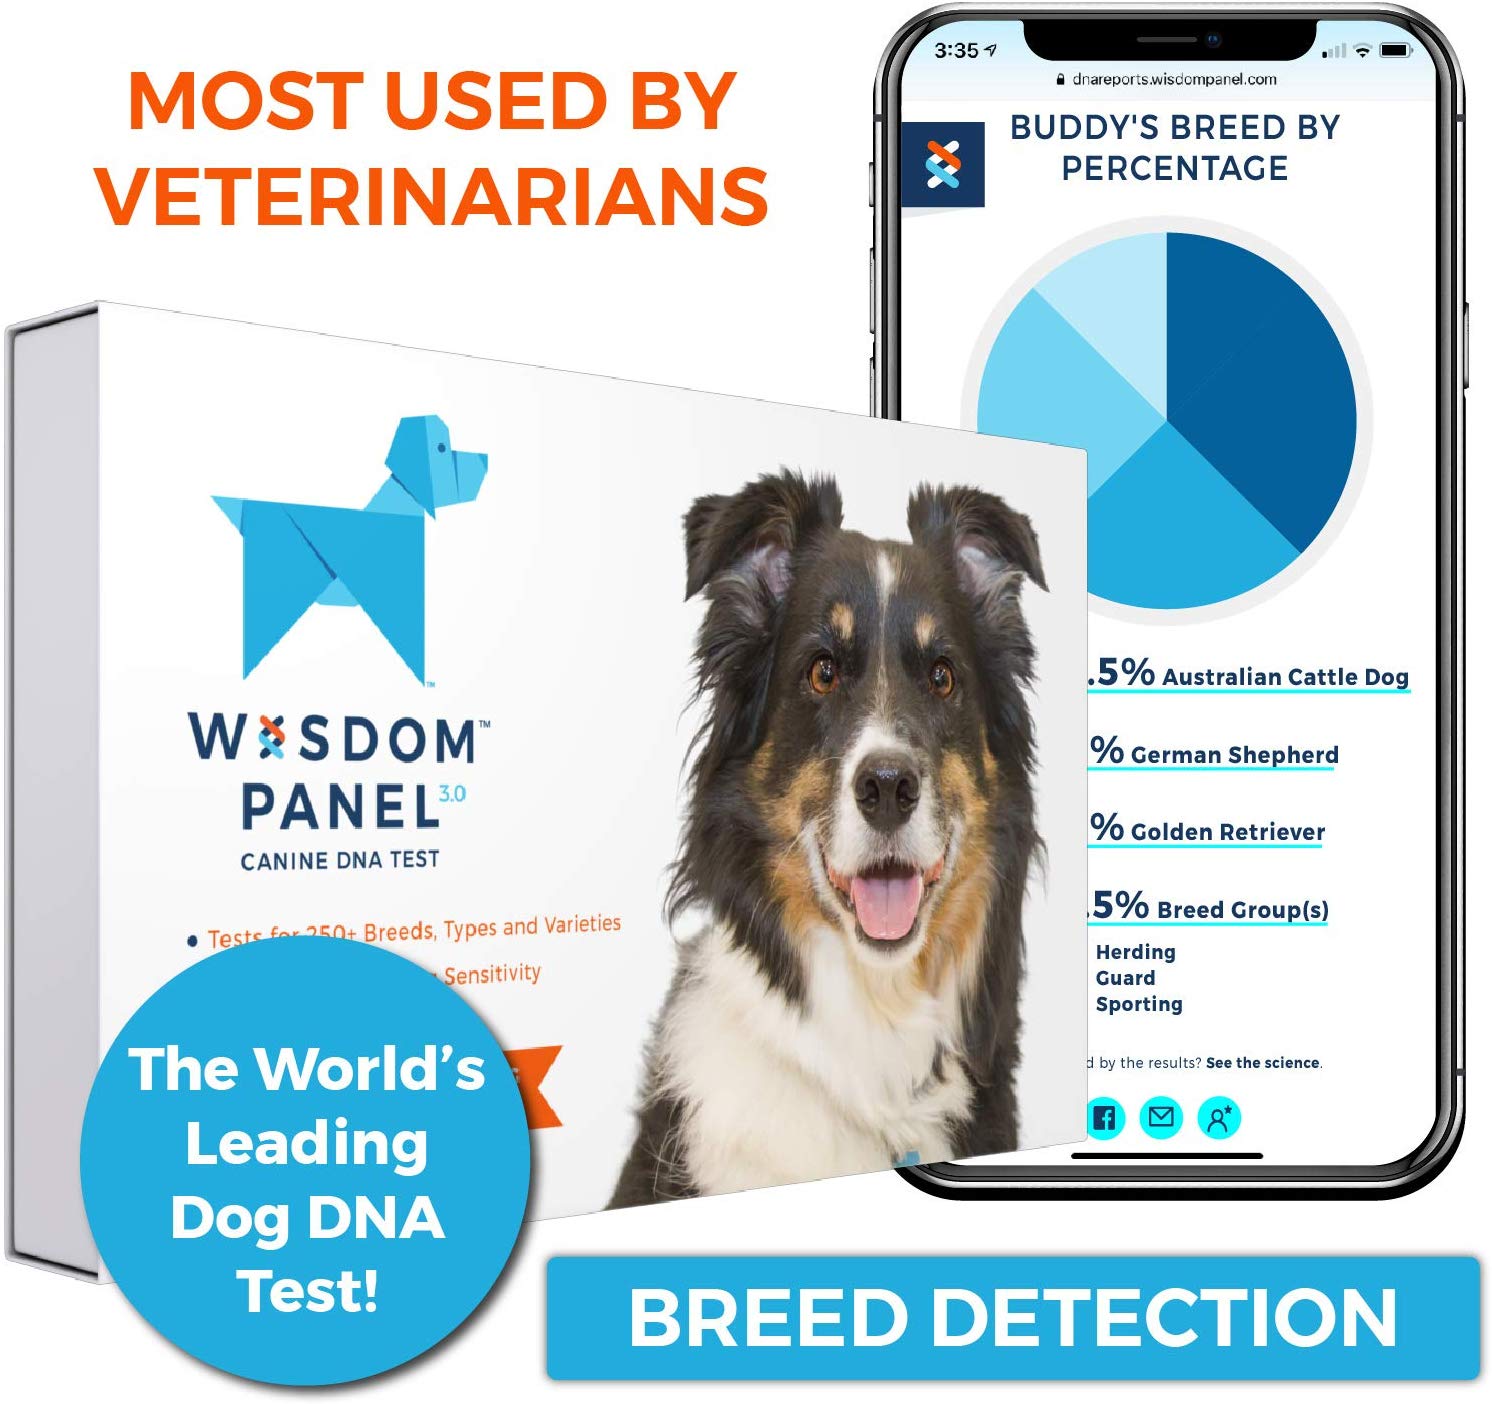 canine dna test